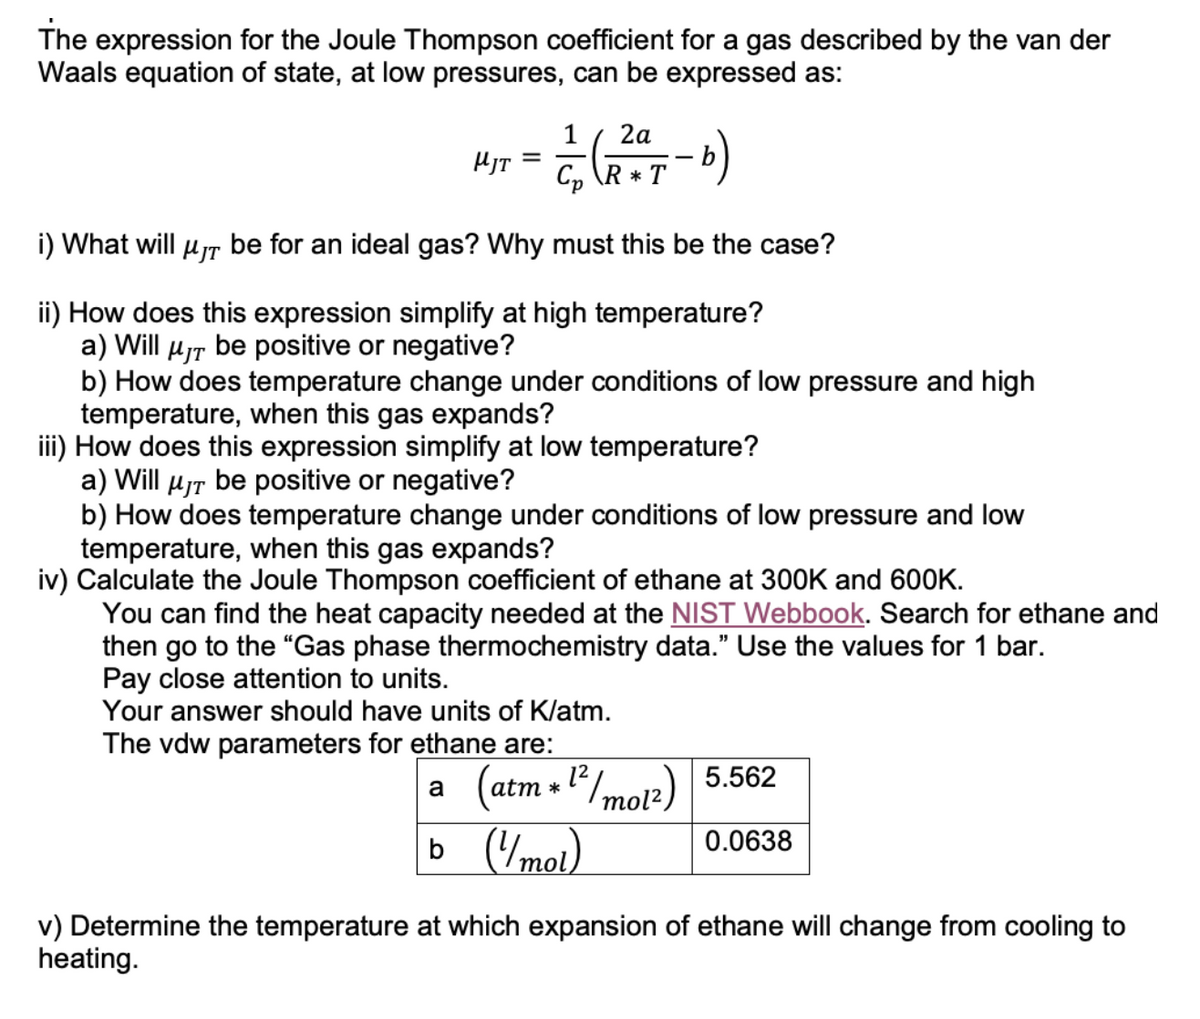 The expression for the Joule Thompson coefficient for a gas described by the van der
Waals equation of state, at low pressures, can be expressed as:
1 2a
-—- (2017-b)
Cp\R* T
i) What will μT be for an ideal gas? Why must this be the case?
ii) How does this expression simplify at high temperature?
a) Will μT be positive or negative?
b) How does temperature change under conditions of low pressure and high
temperature, when this gas expands?
iii) How does this expression simplify at low temperature?
a) Will μT be positive or negative?
b) How does temperature change under conditions of low pressure and low
temperature, when this gas expands?
iv) Calculate the Joule Thompson coefficient of ethane at 300K and 600K.
HJT
=
You can find the heat capacity needed at the NIST Webbook. Search for ethane and
then go to the "Gas phase thermochemistry data." Use the values for 1 bar.
Pay close attention to units.
Your answer should have units of K/atm.
The vdw parameters for ethane are:
a
(atm*1²/mo12) 5.562
b (1/mol)
0.0638
v) Determine the temperature at which expansion of ethane will change from cooling to
heating.